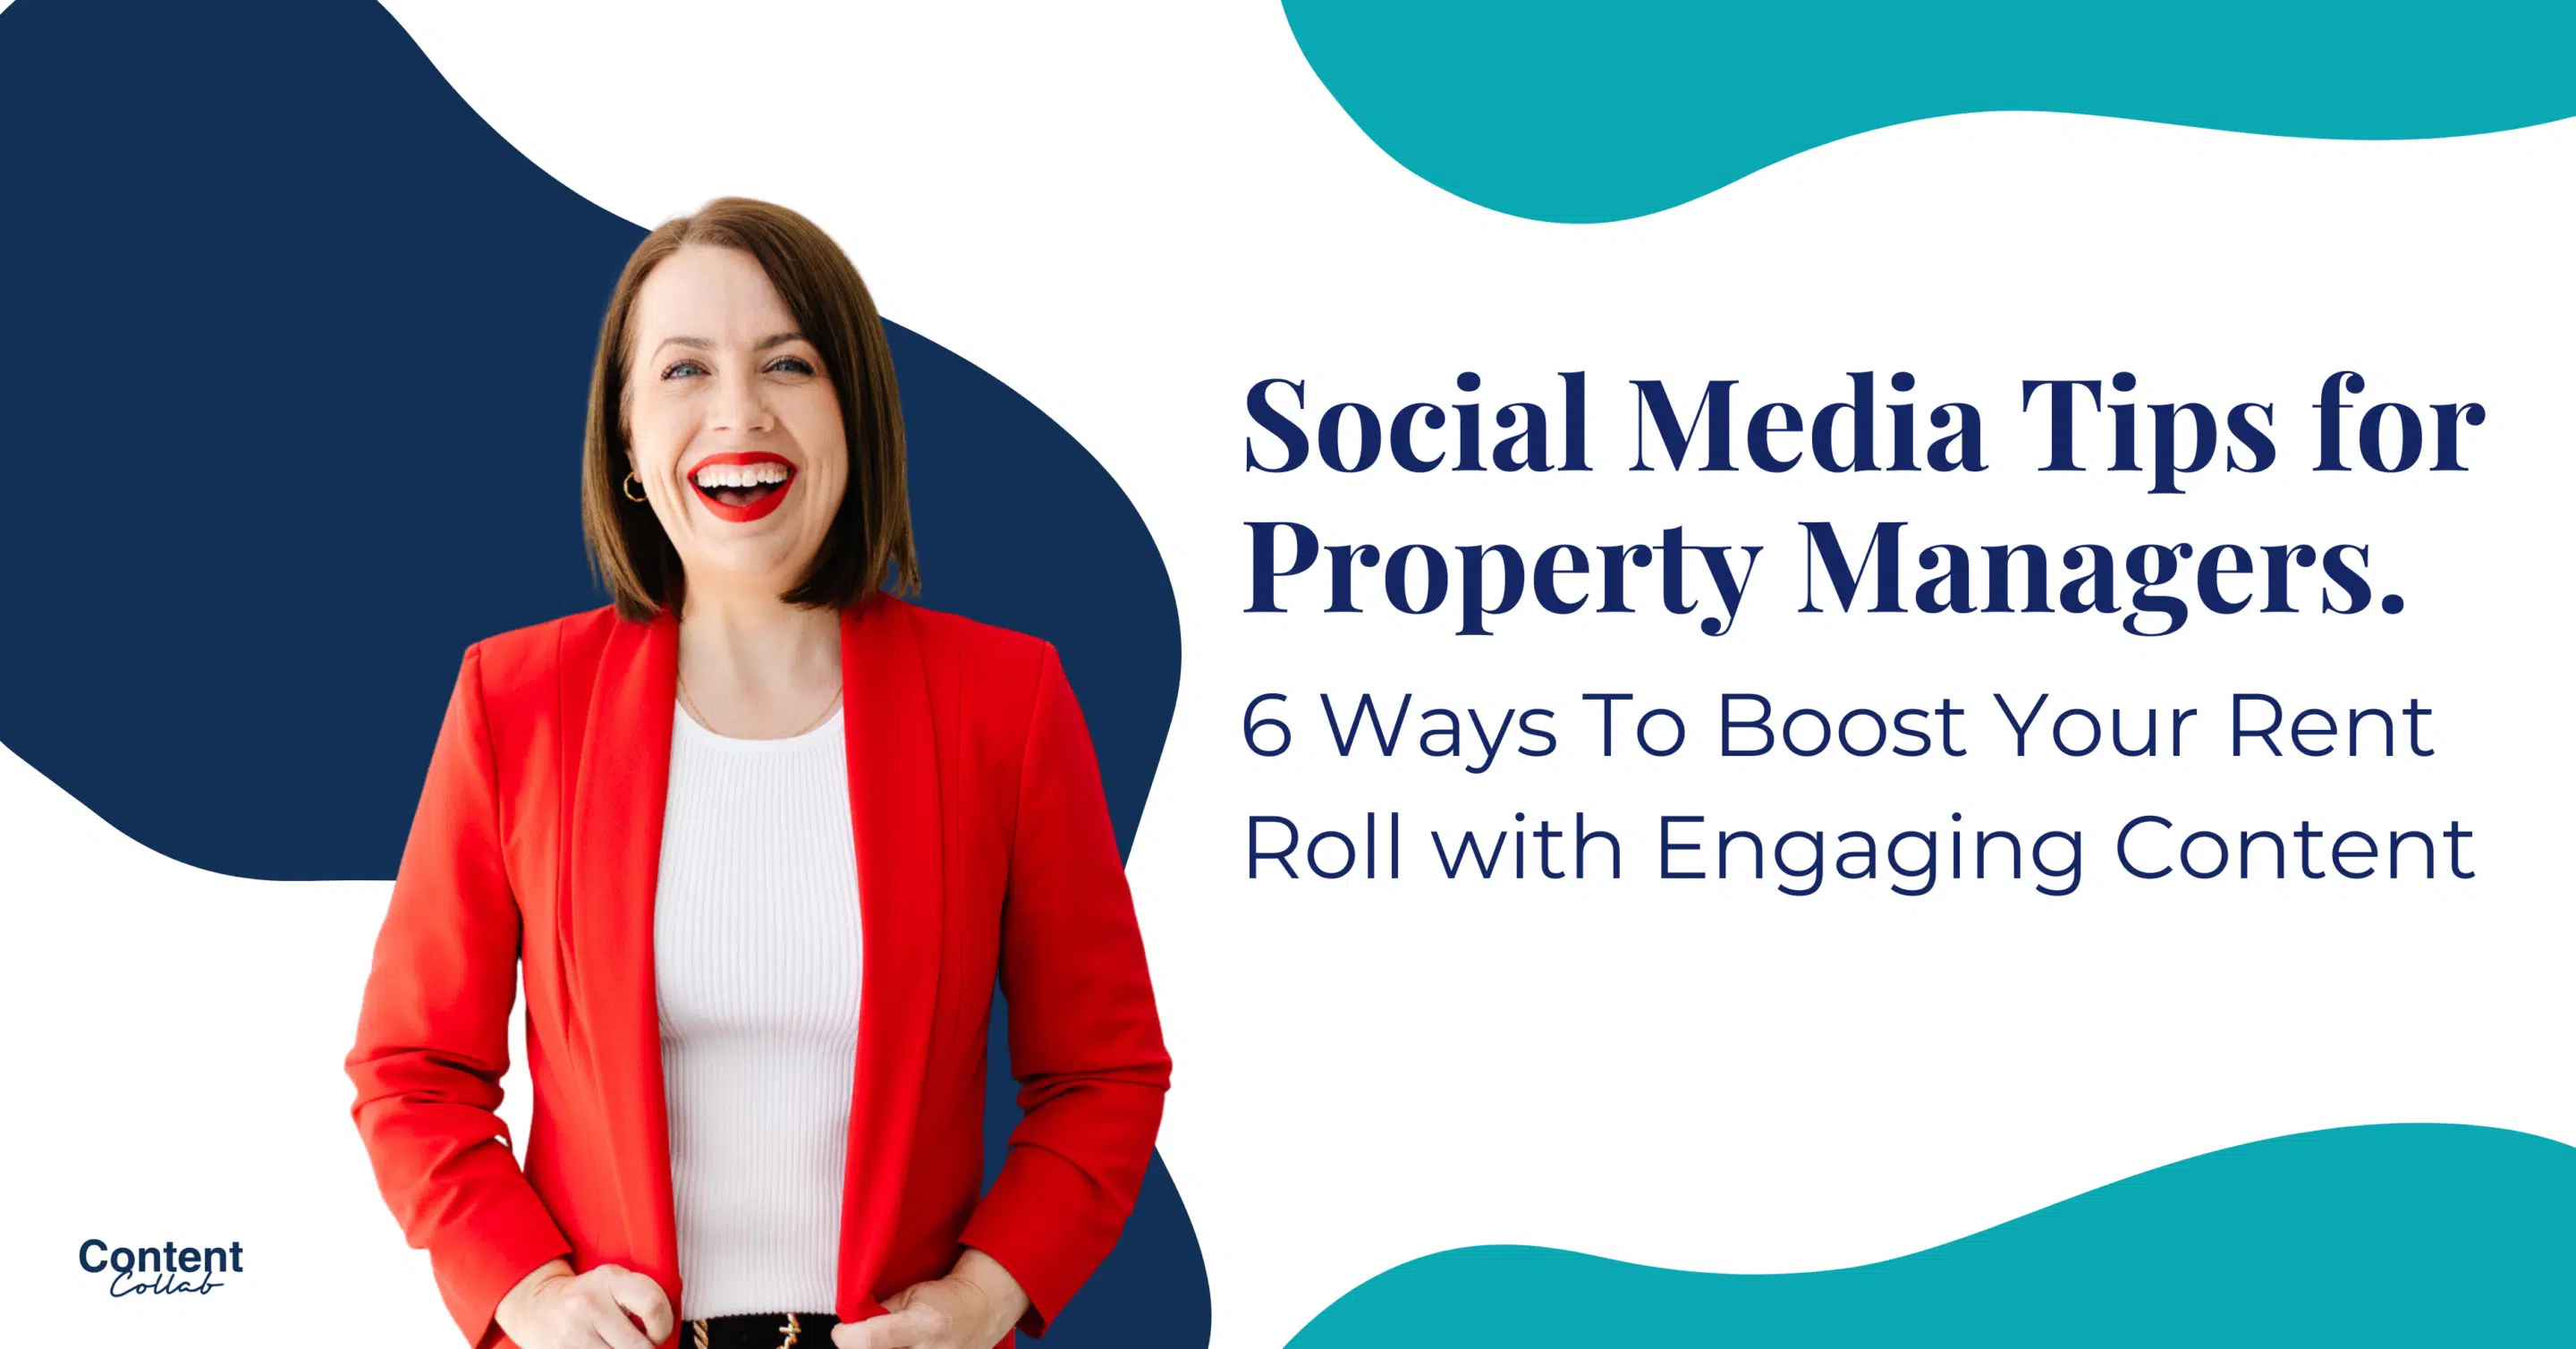 Social Media Tips for Property Managers: 6 Ways To Boost Your Rent Roll with Engaging Content